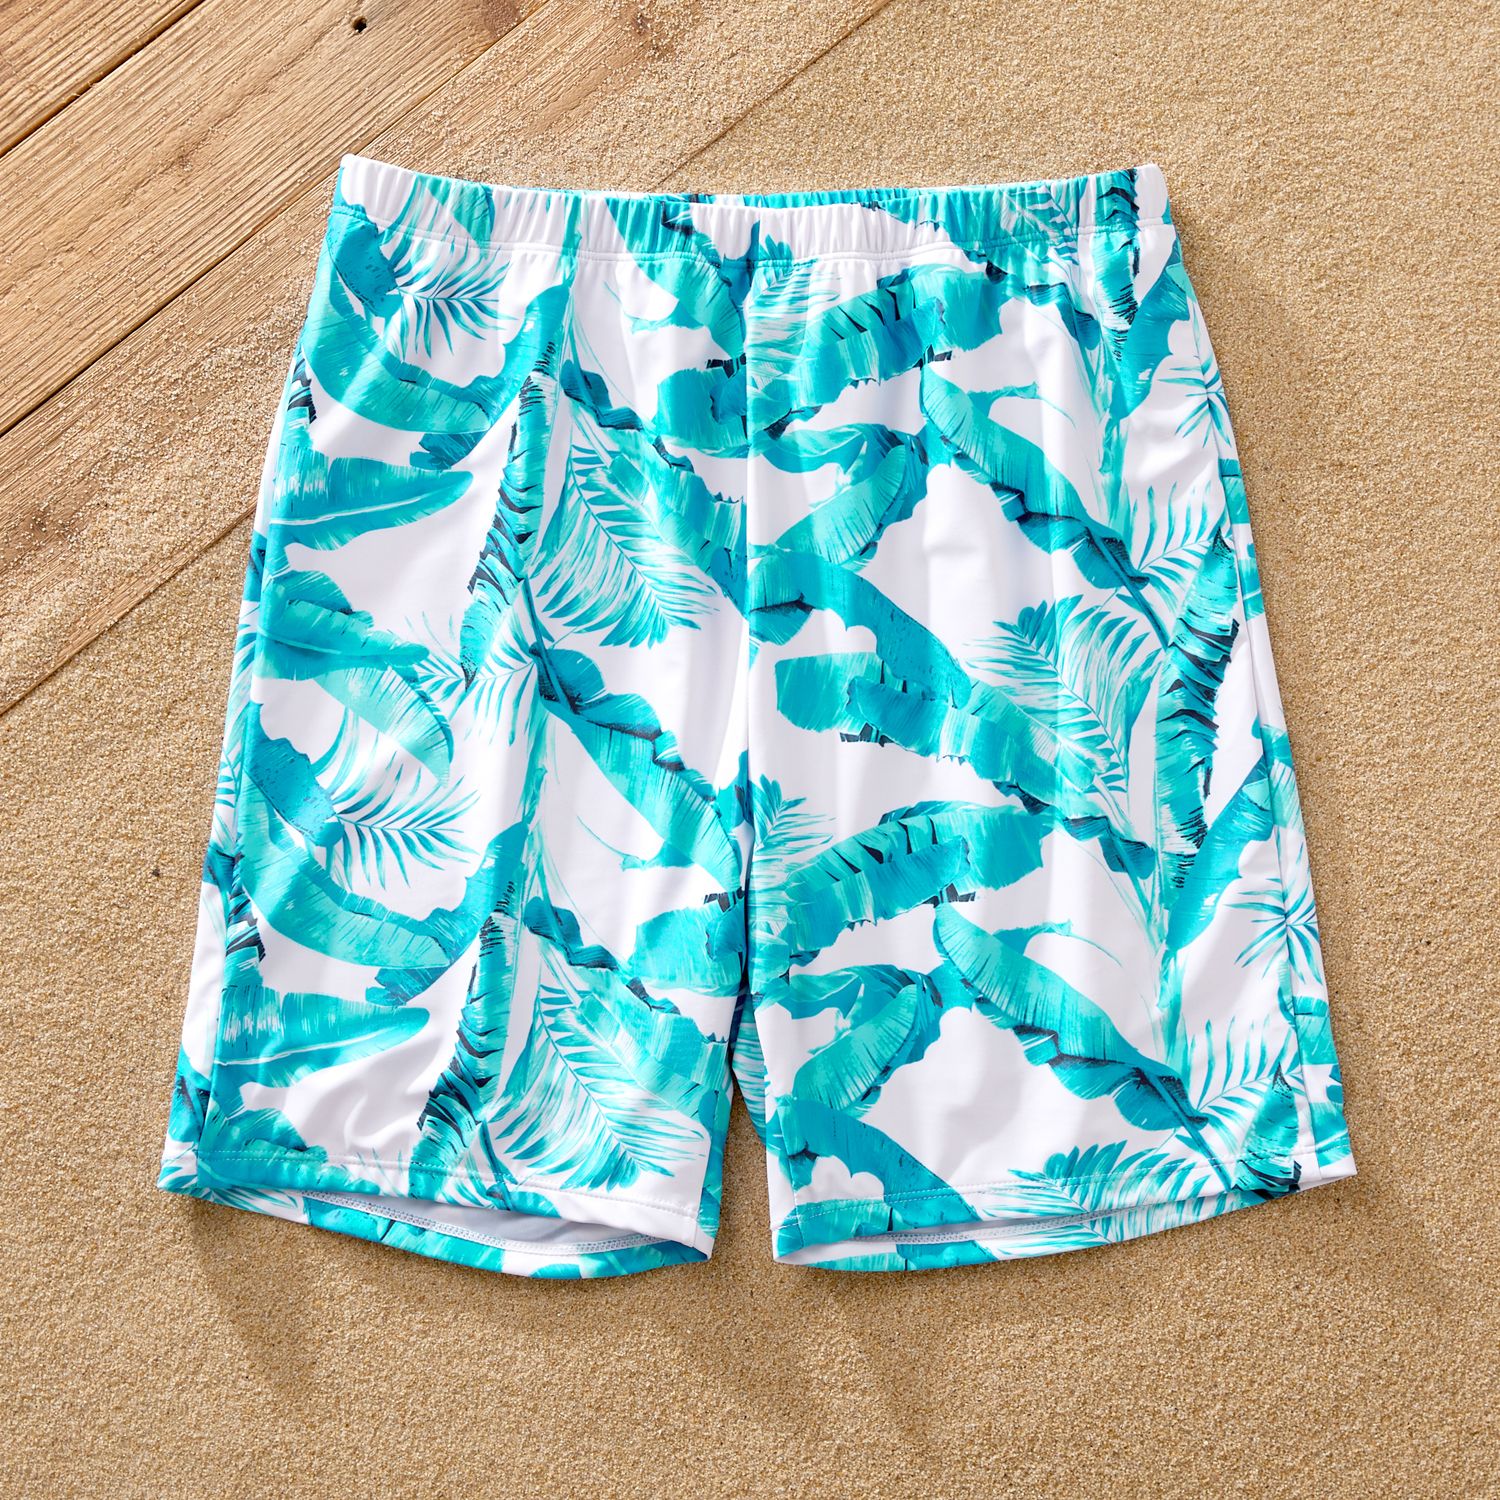 Family Matching Crisscross Front One-piece Swimsuit Or Plant Print Swim Trunks Shorts